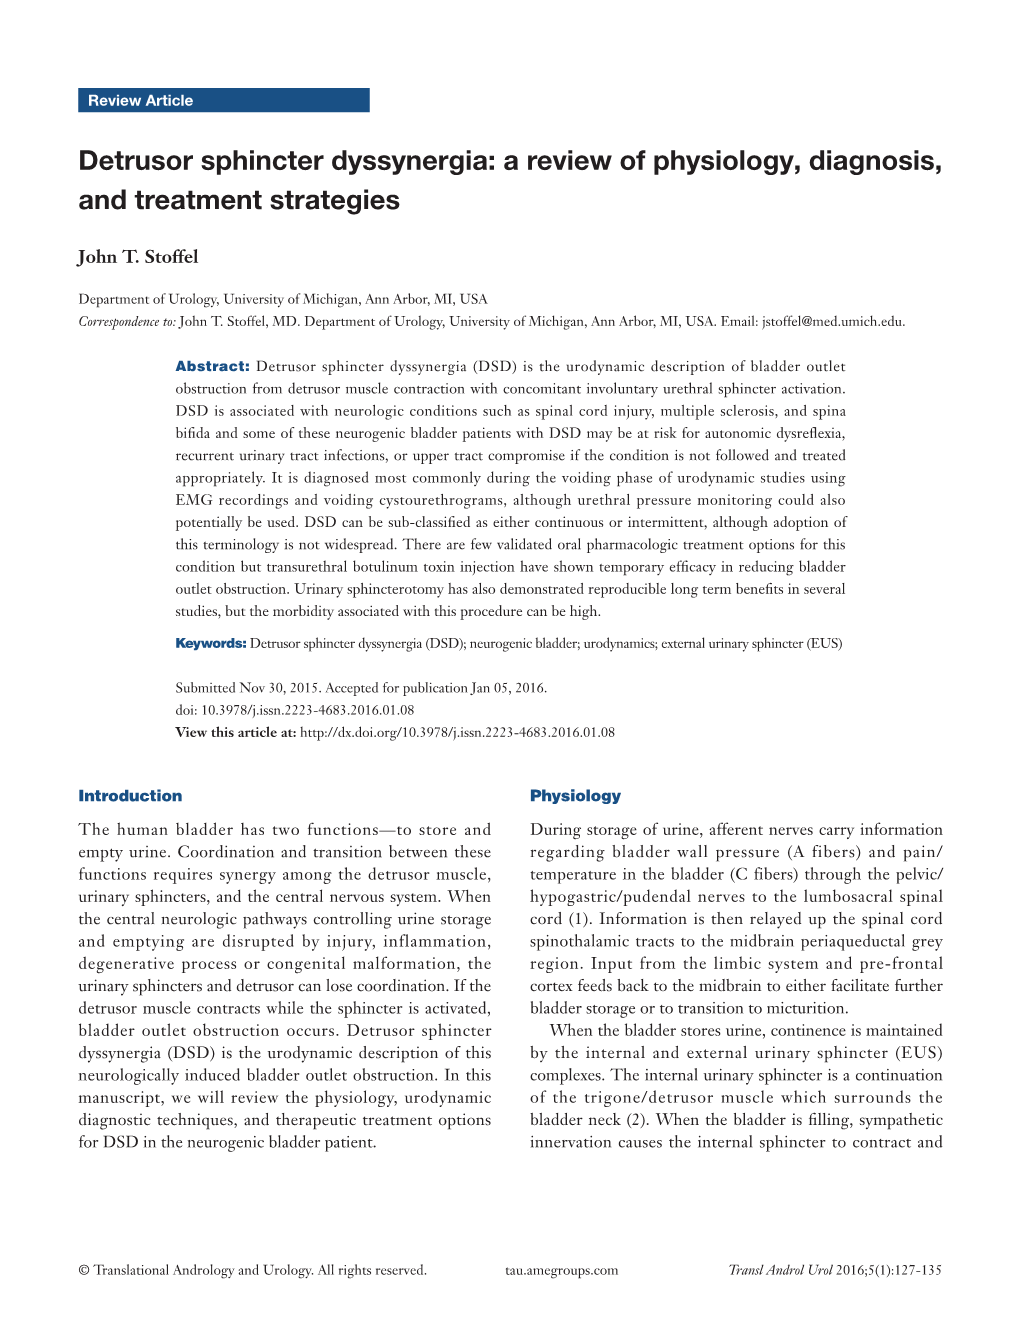 Detrusor Sphincter Dyssynergia: a Review of Physiology, Diagnosis, and Treatment Strategies